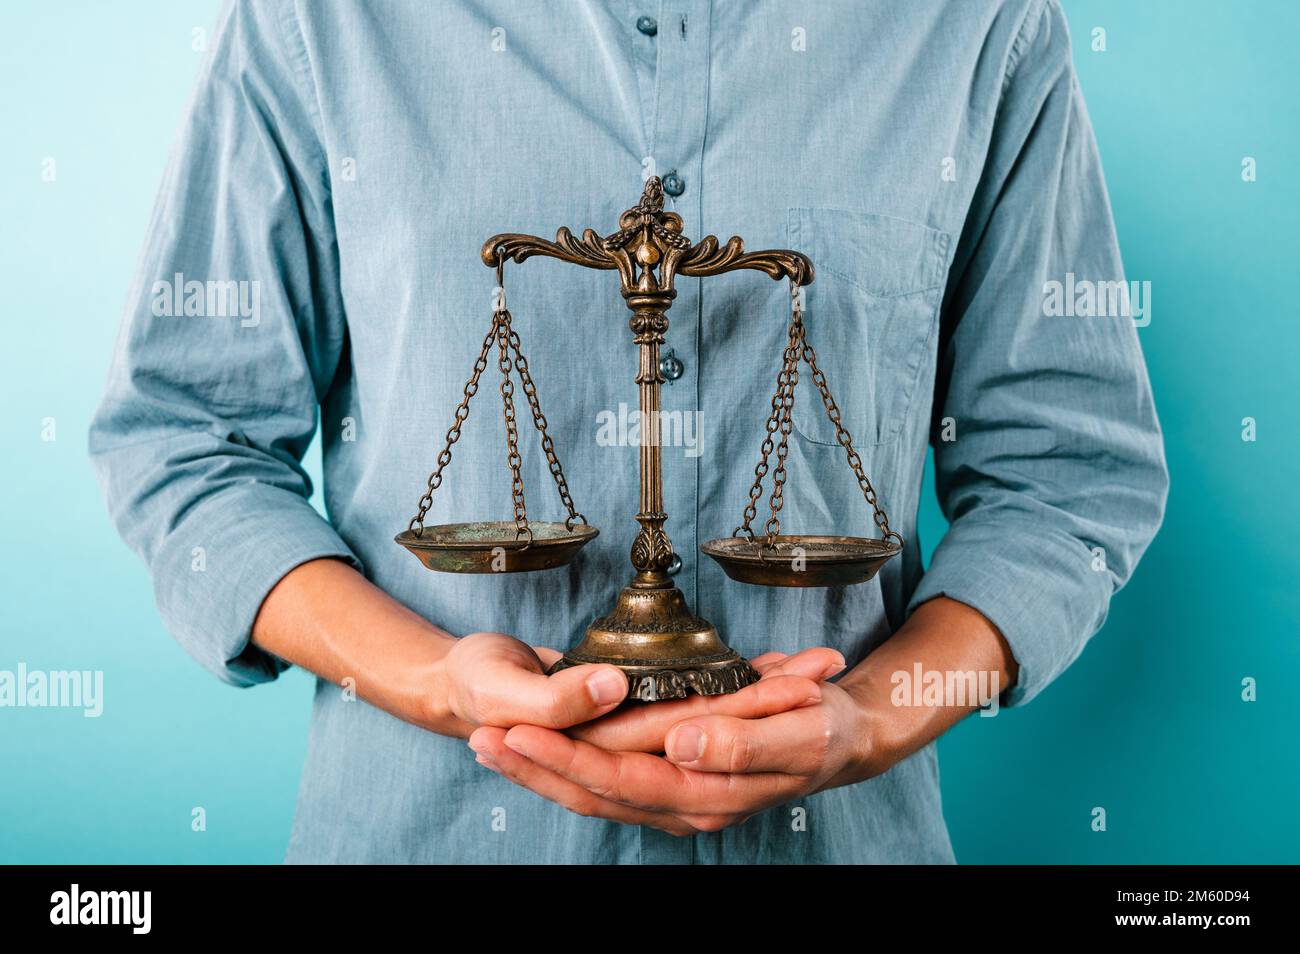 Plates in the balance. Concept of finance and justice law Stock Photo